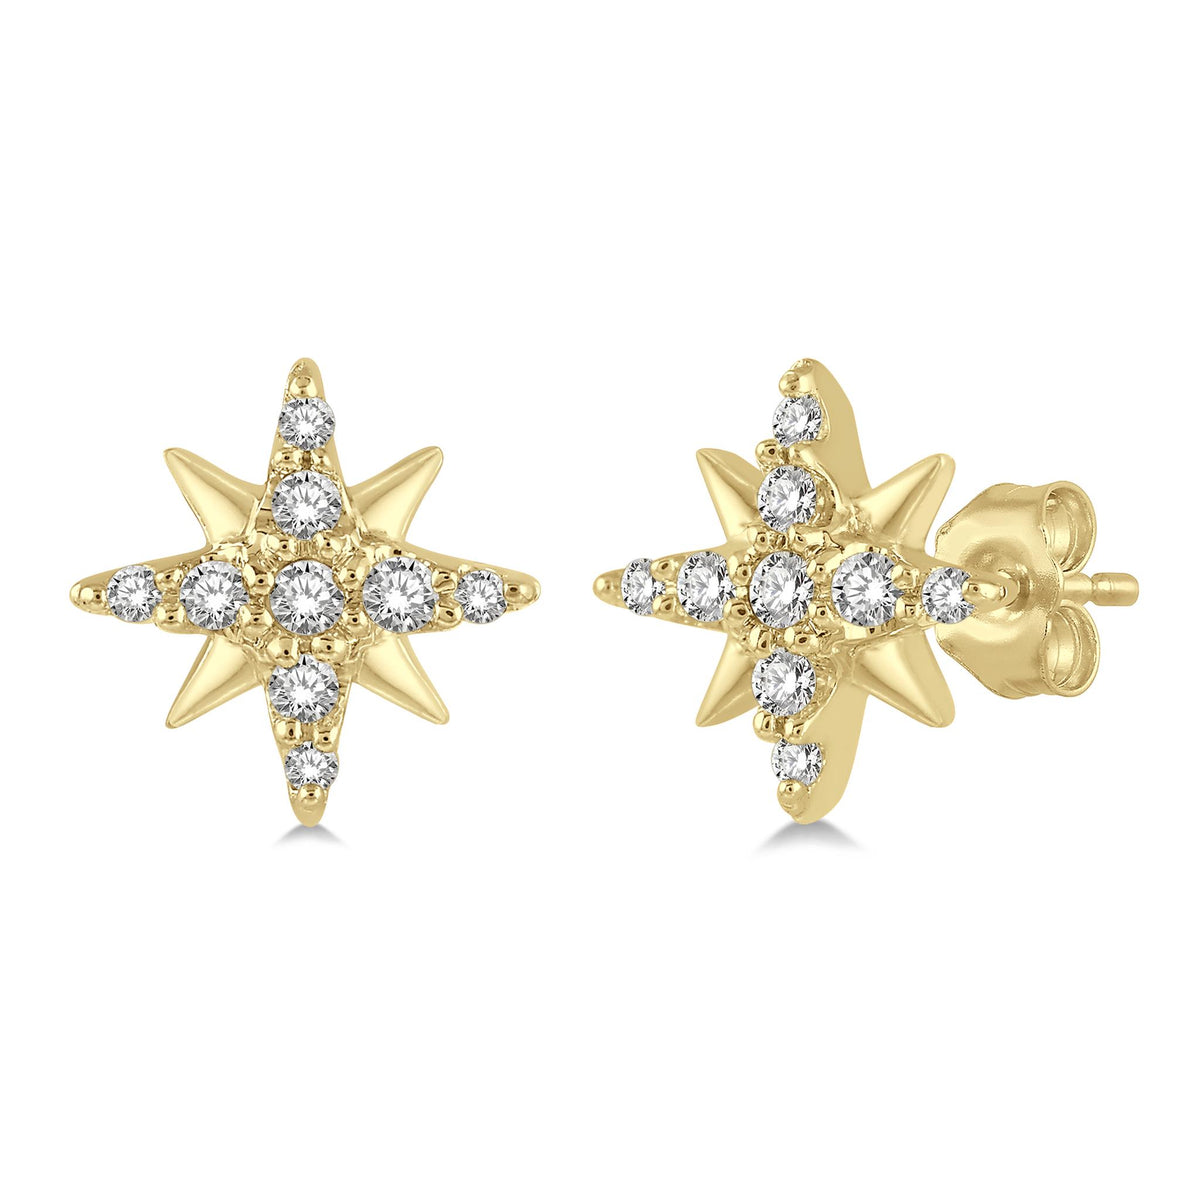 Lasker Petites-10Kt Yellow Gold Star Earrings with 0.10cttw Natural Diamonds